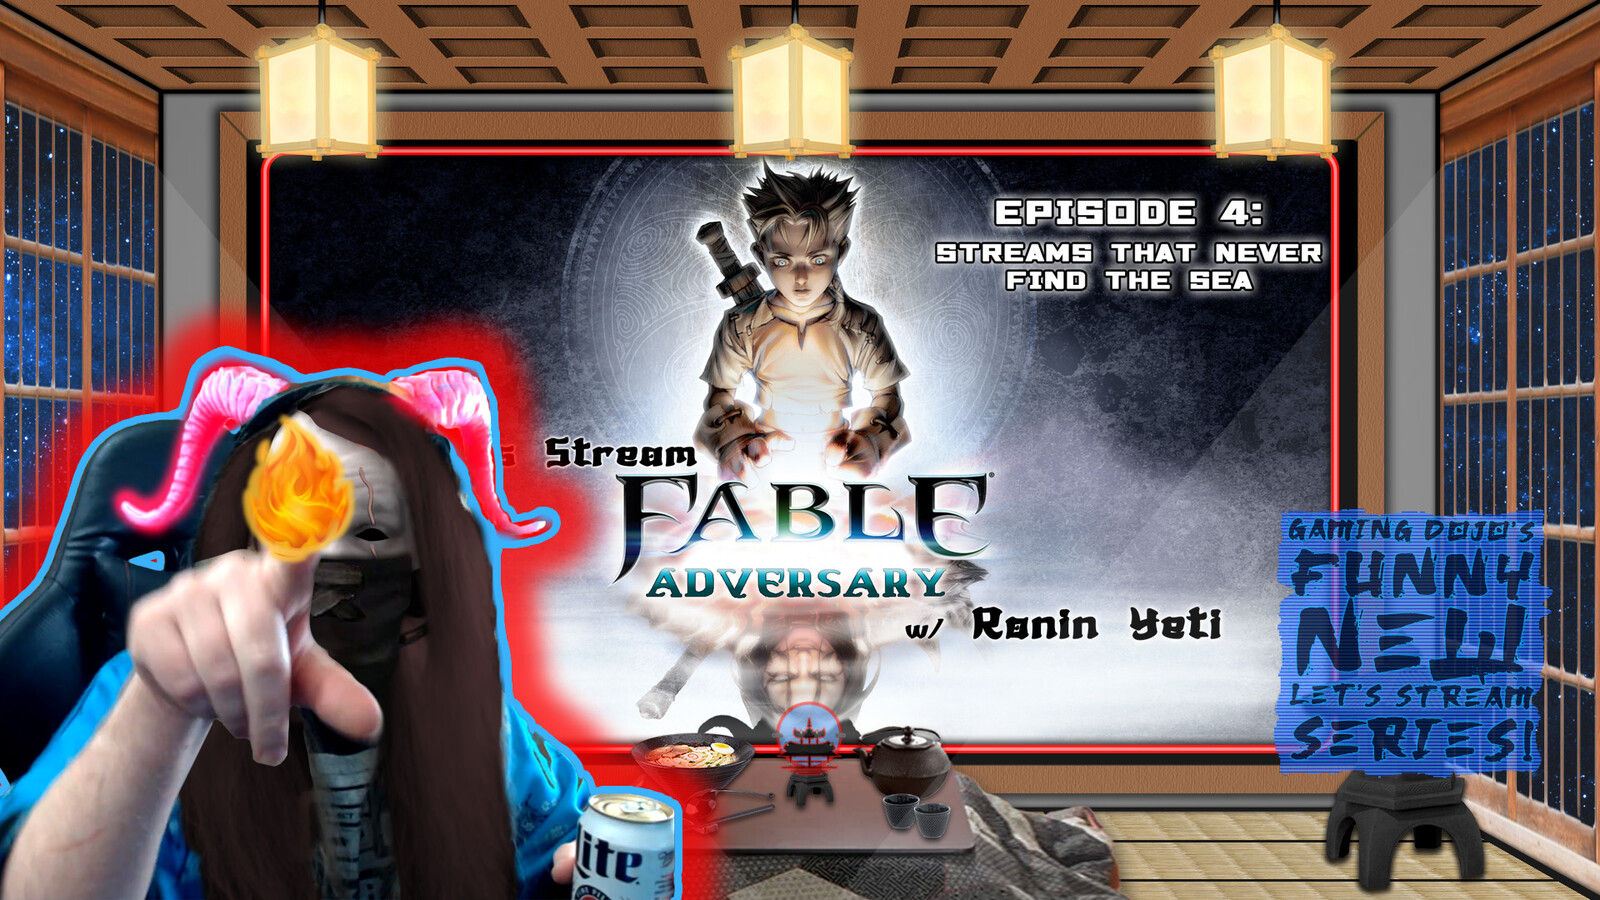 Let's Stream "Fable: Adversary" Episode 4 Image | Ronin Yeti Twitch Streaming